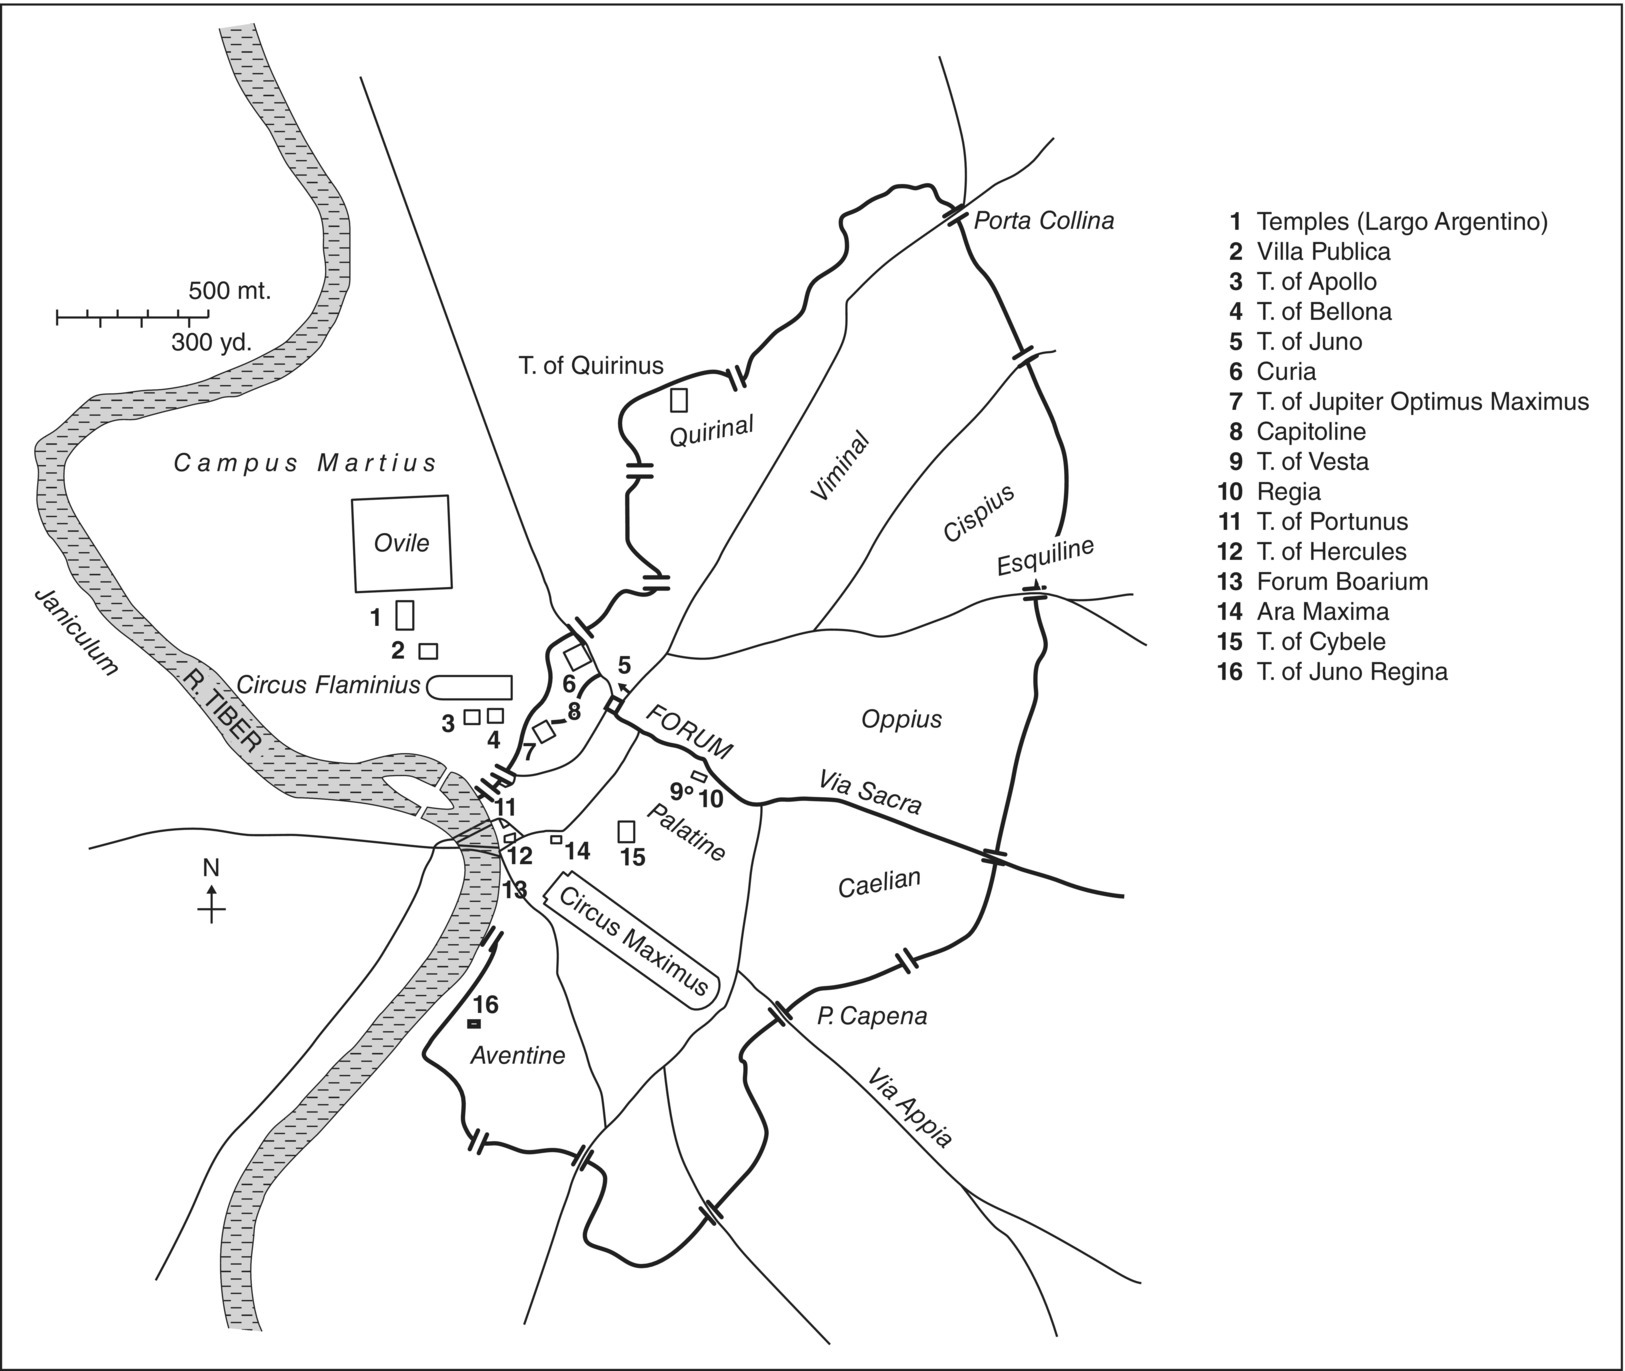 Map of the city of Rome marking Oppius, FORUM, Viminal, etc. and depicting box markers labeled Temples (Largo Argentino) (1), Villa Publica (2), T. of Apollo (3), T. of Bellona (4), T. of Juno (5), Curia (6), etc.